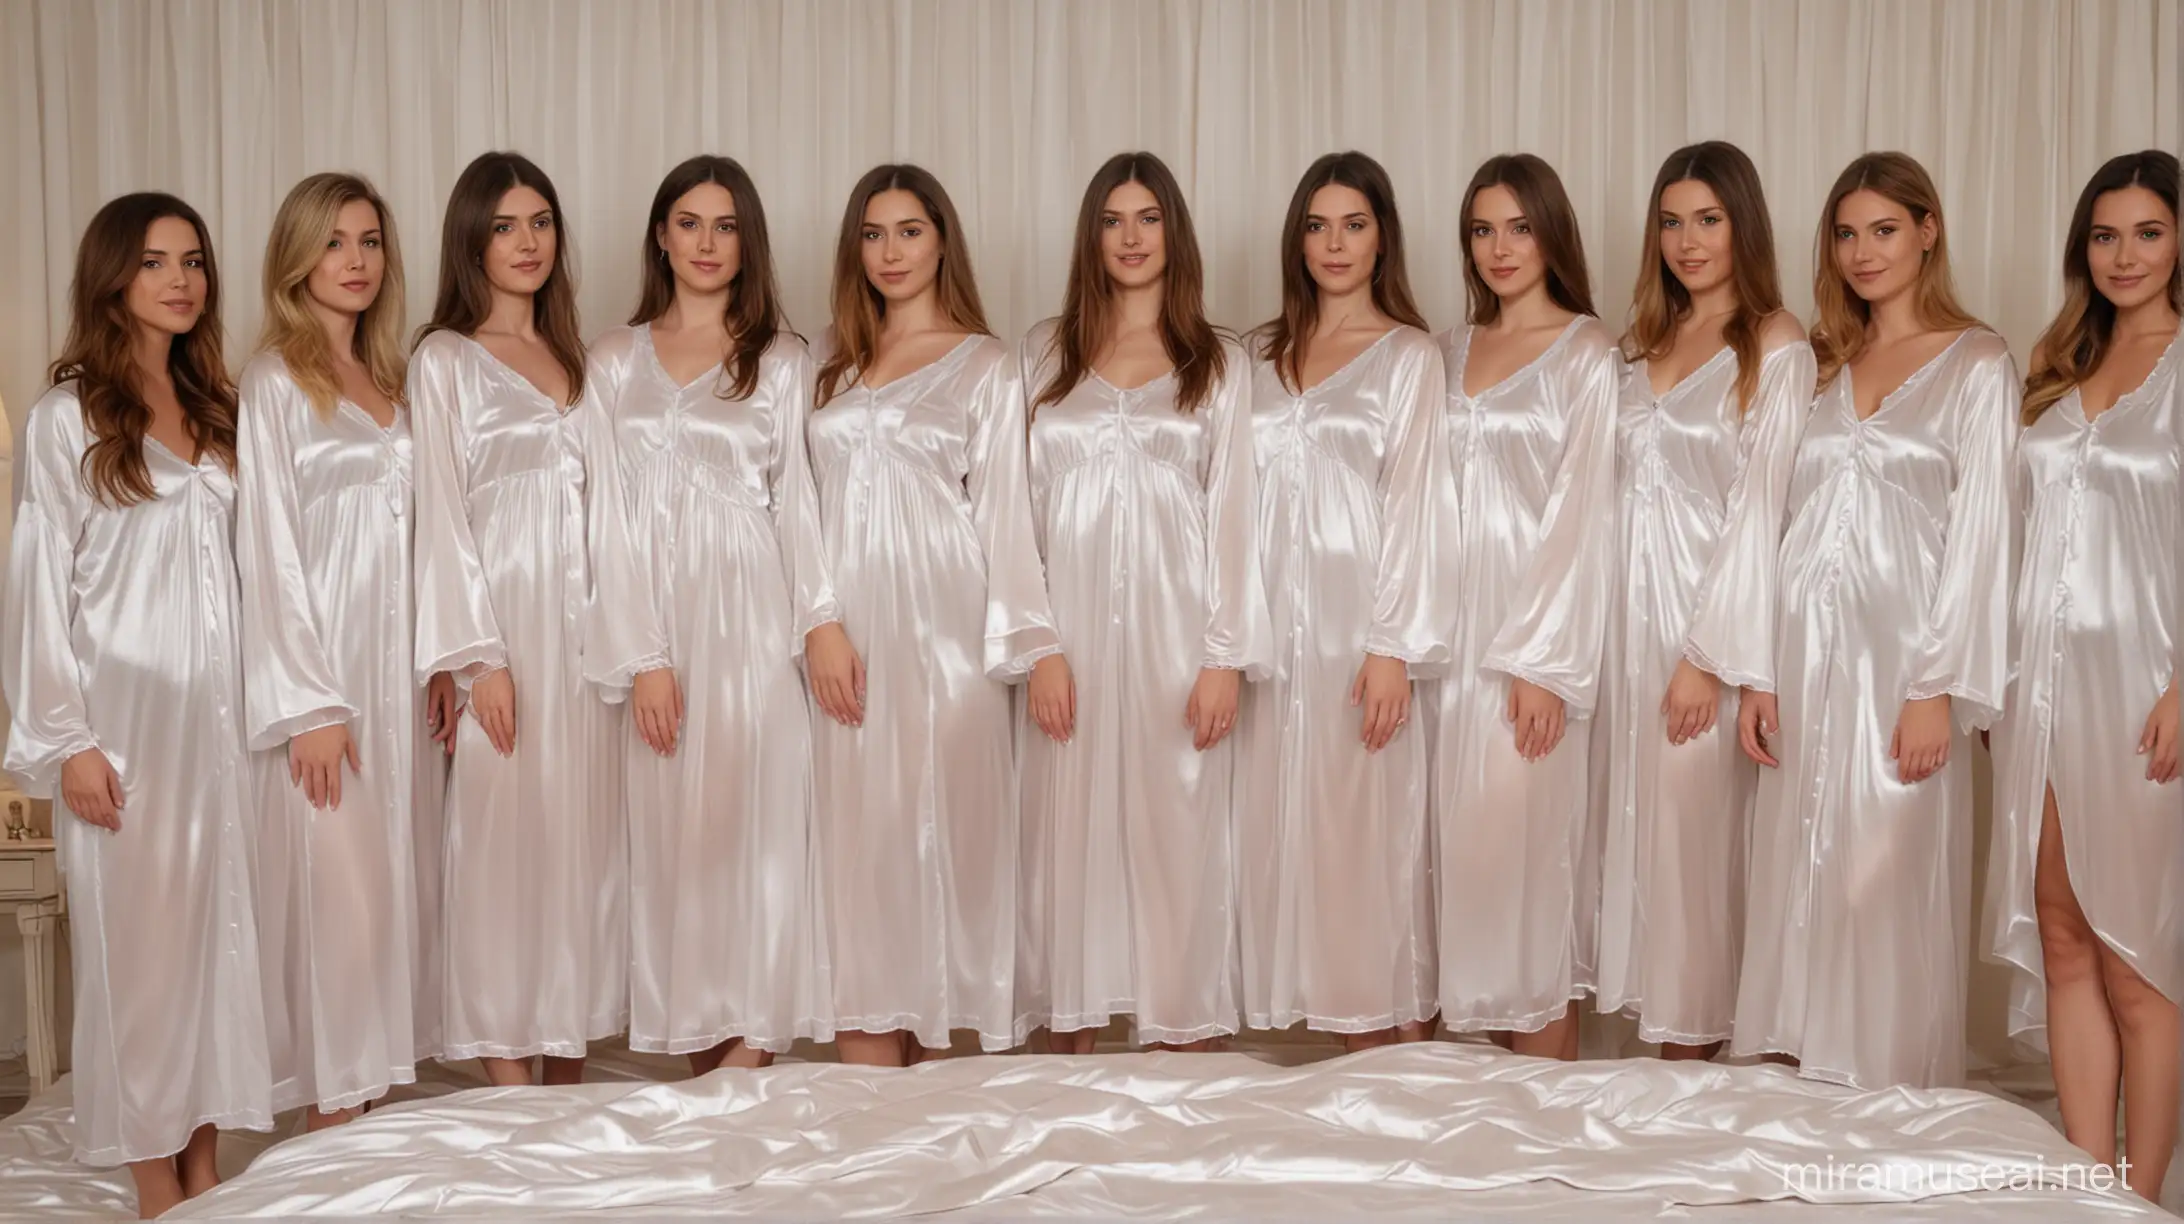 10 women in transparent milky satin nightgowns stand in 10 rows on a giant satin bed and look at you